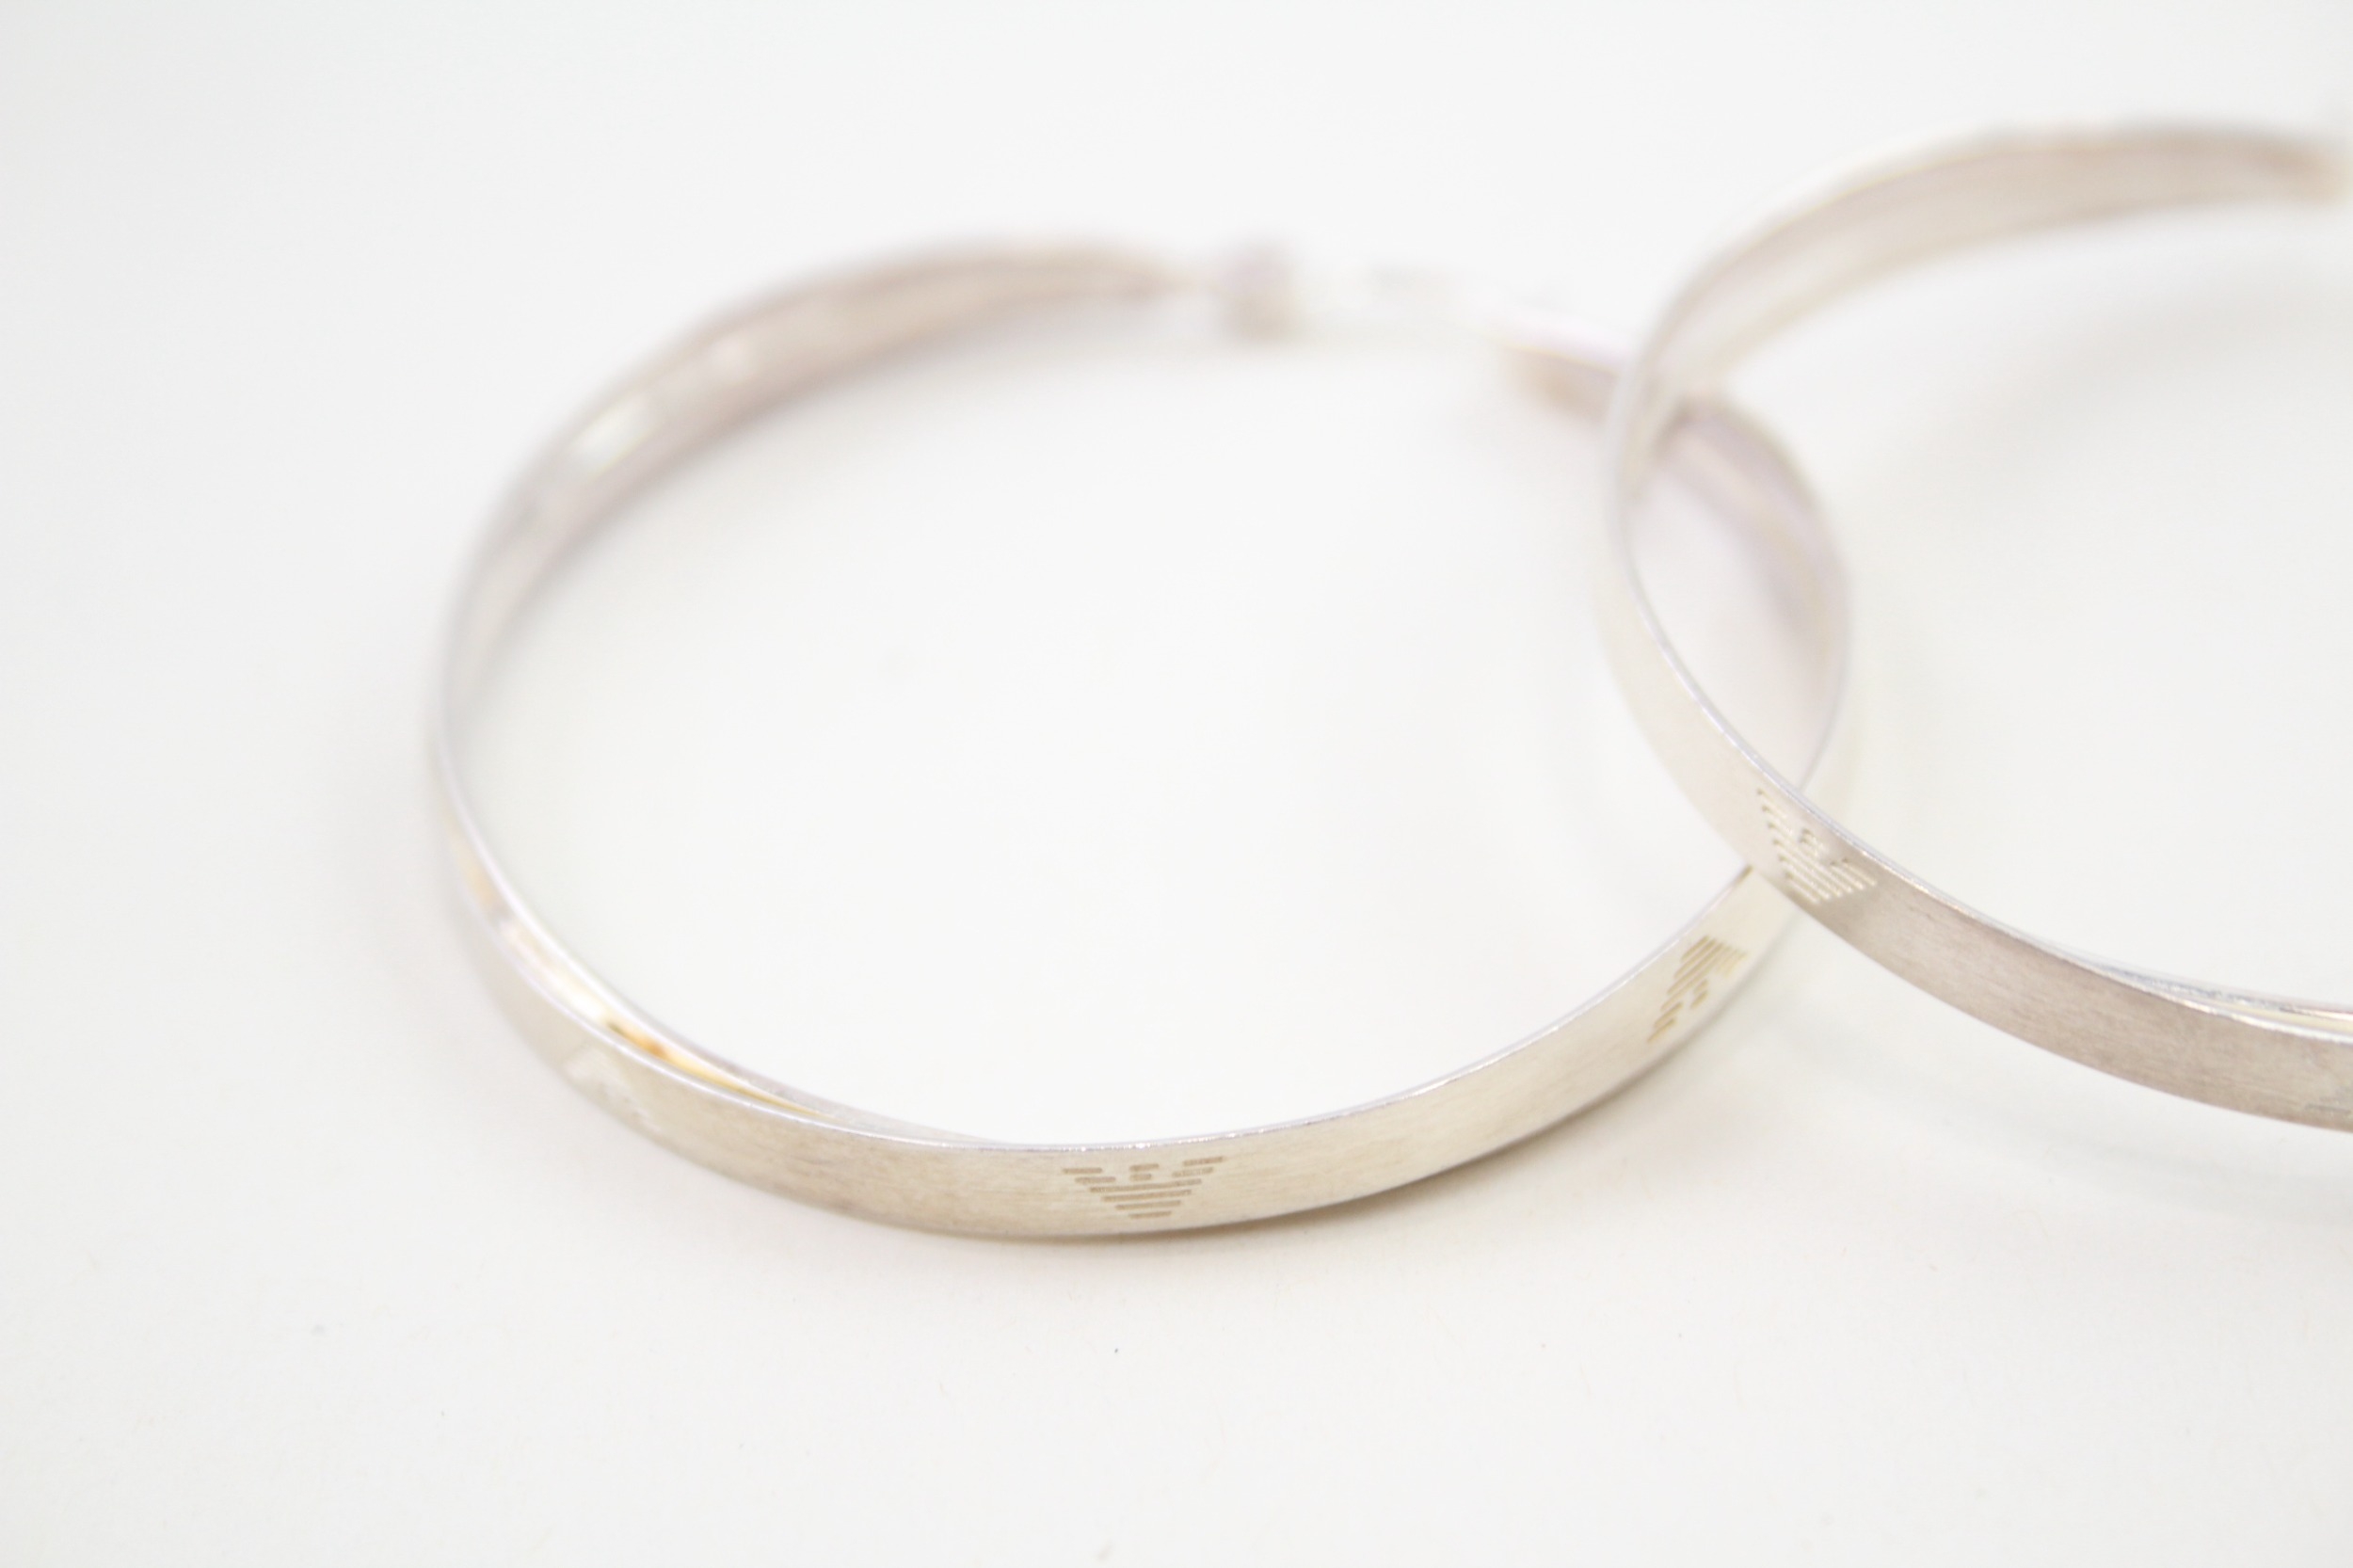 A pair of silver hoop earrings by Emporio Armani (14g) - Image 4 of 5